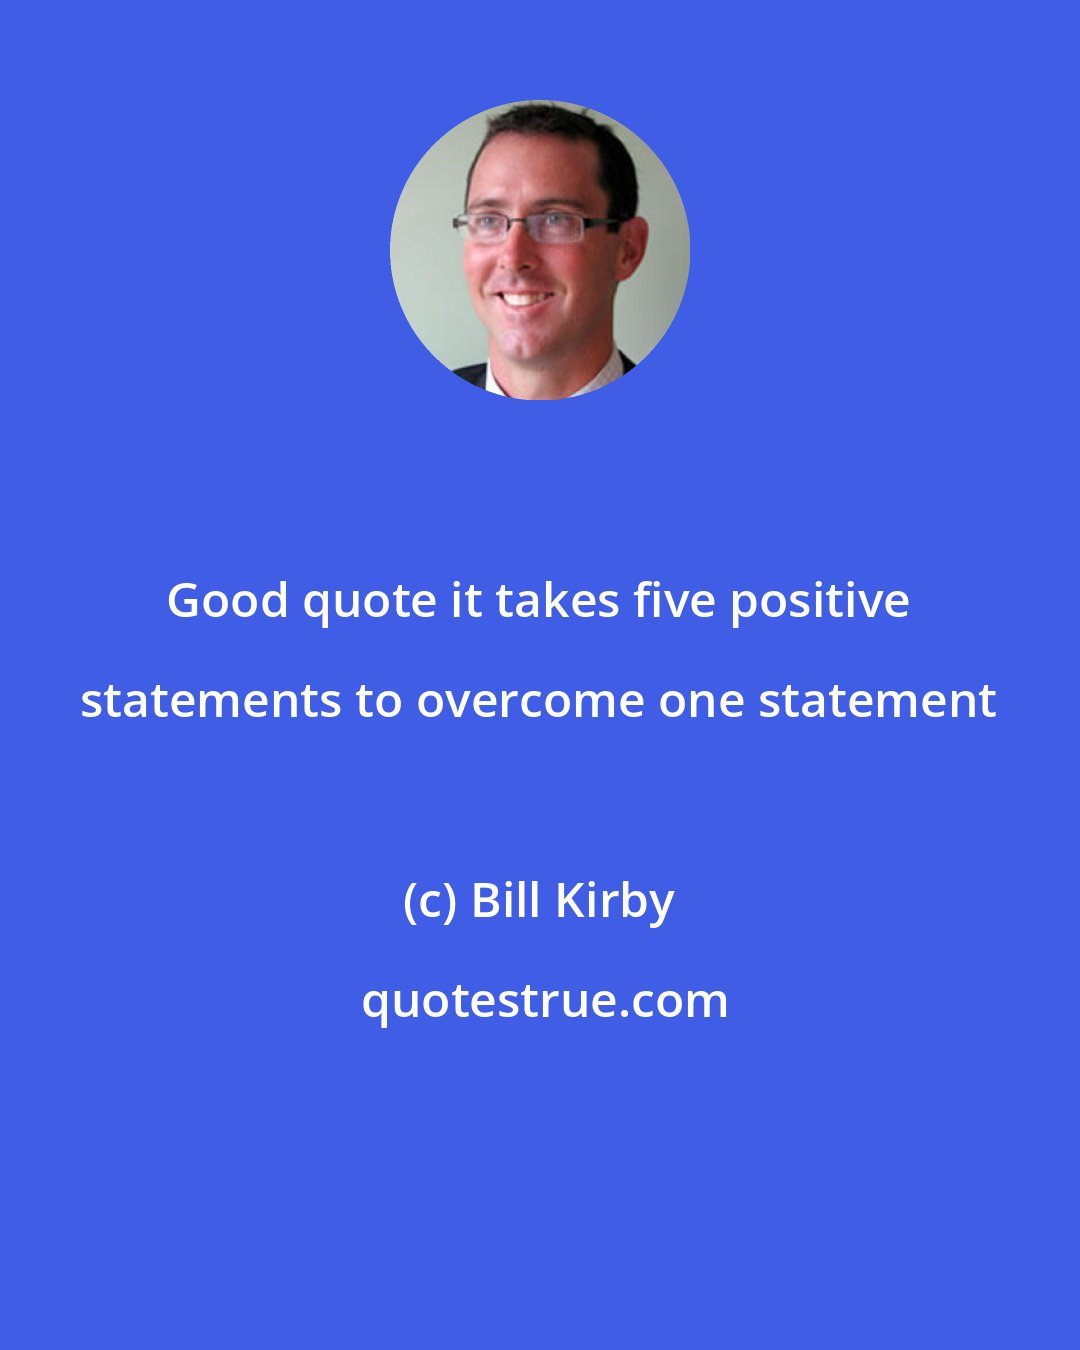 Bill Kirby: Good quote it takes five positive statements to overcome one statement